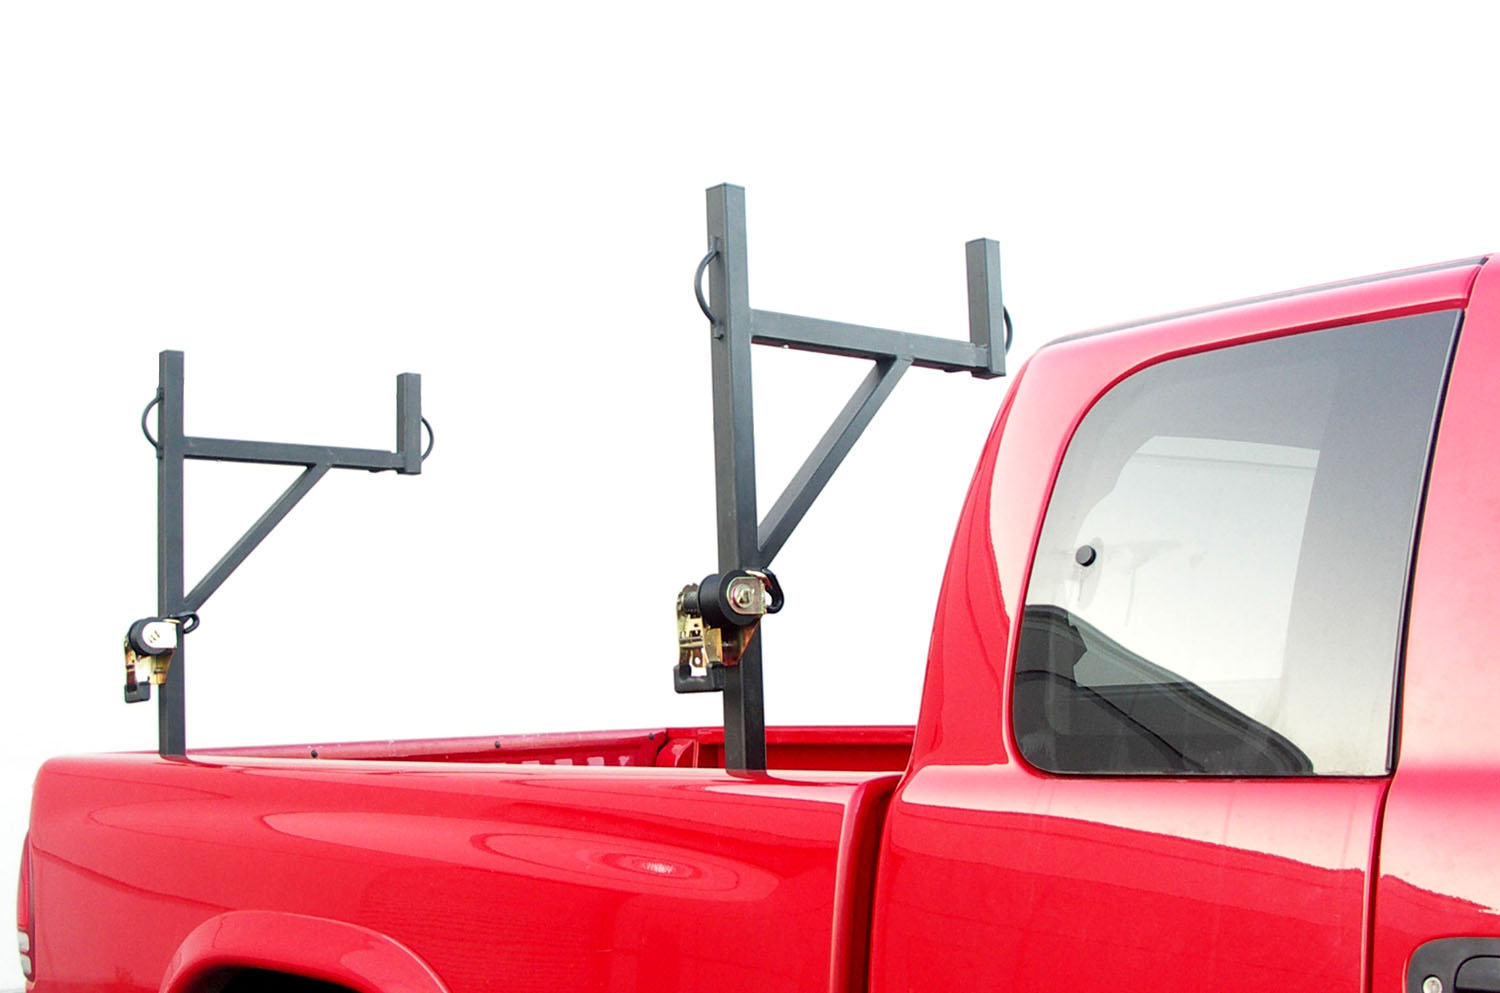 The Sidewinder Ratchet Rack Incorporates IMPORTANT SAFETY and CONVENIENCE FEATURES